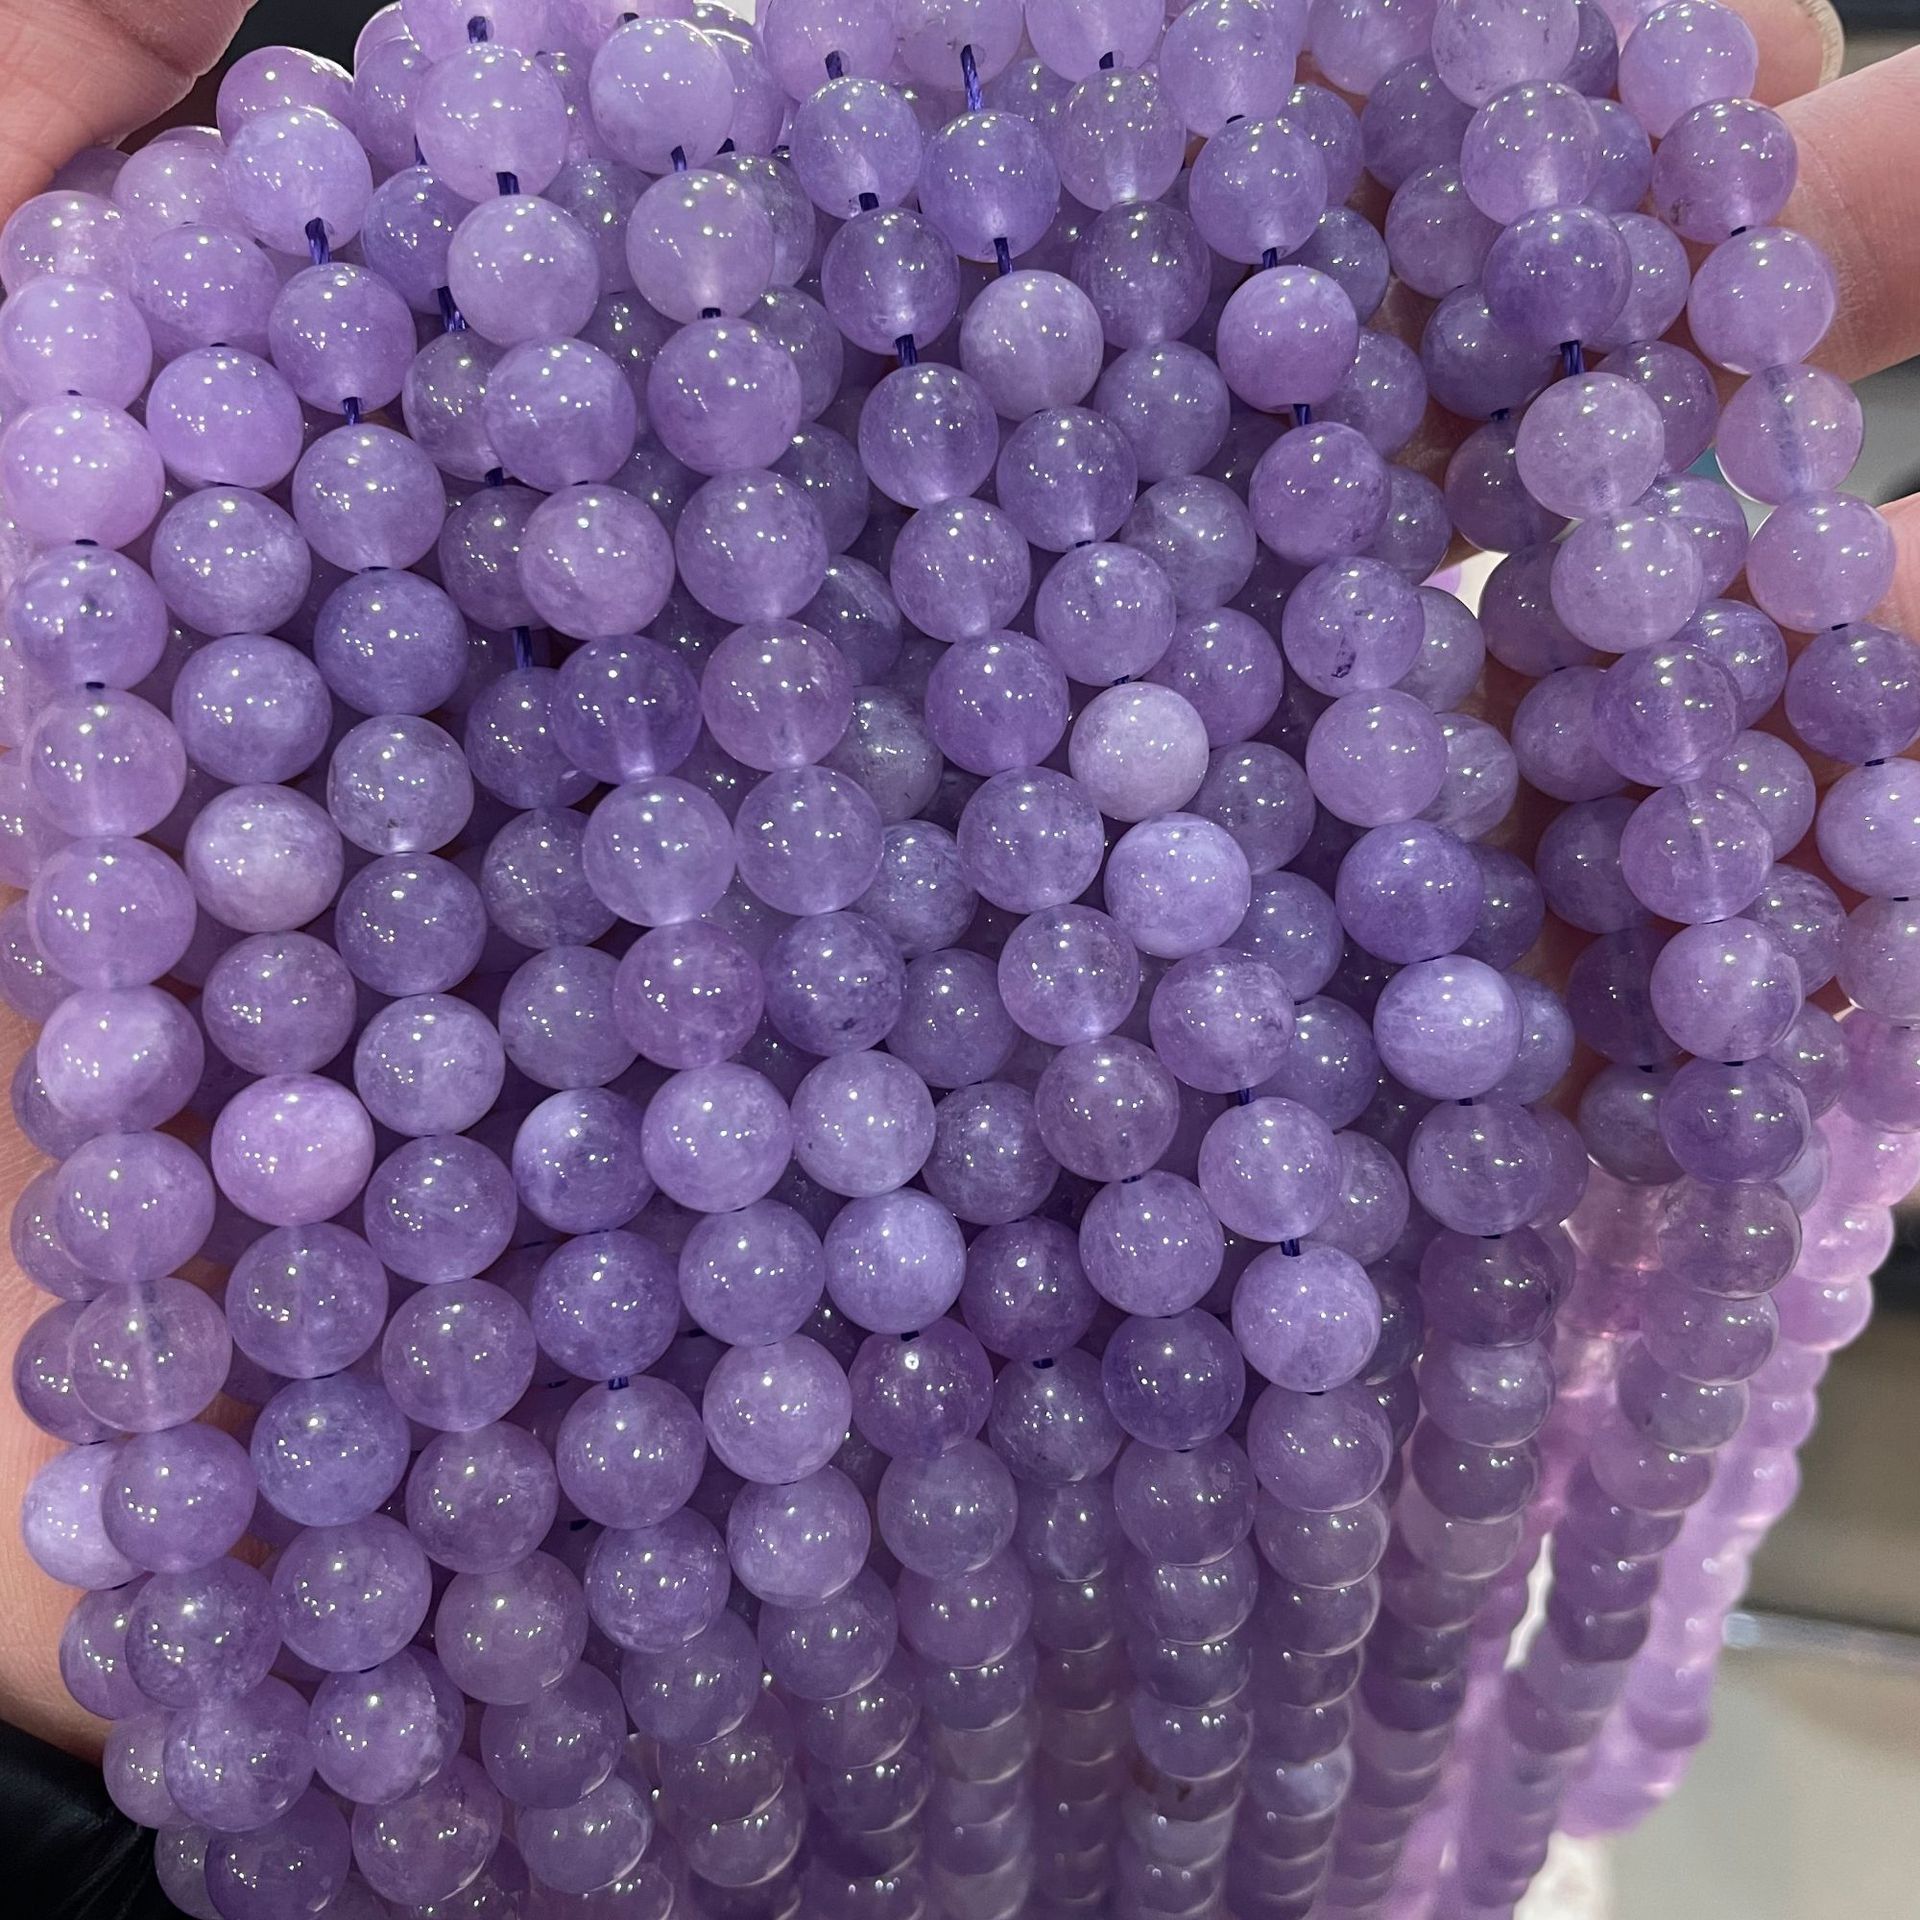 Lavender Amethyst Round Beads Beaded DIY Jewelry Accessories 6mm(0.24)  -10mm(0.4) Optimized Lavender Amethyst Round Beads, Lavender Loose Beads,  Nat